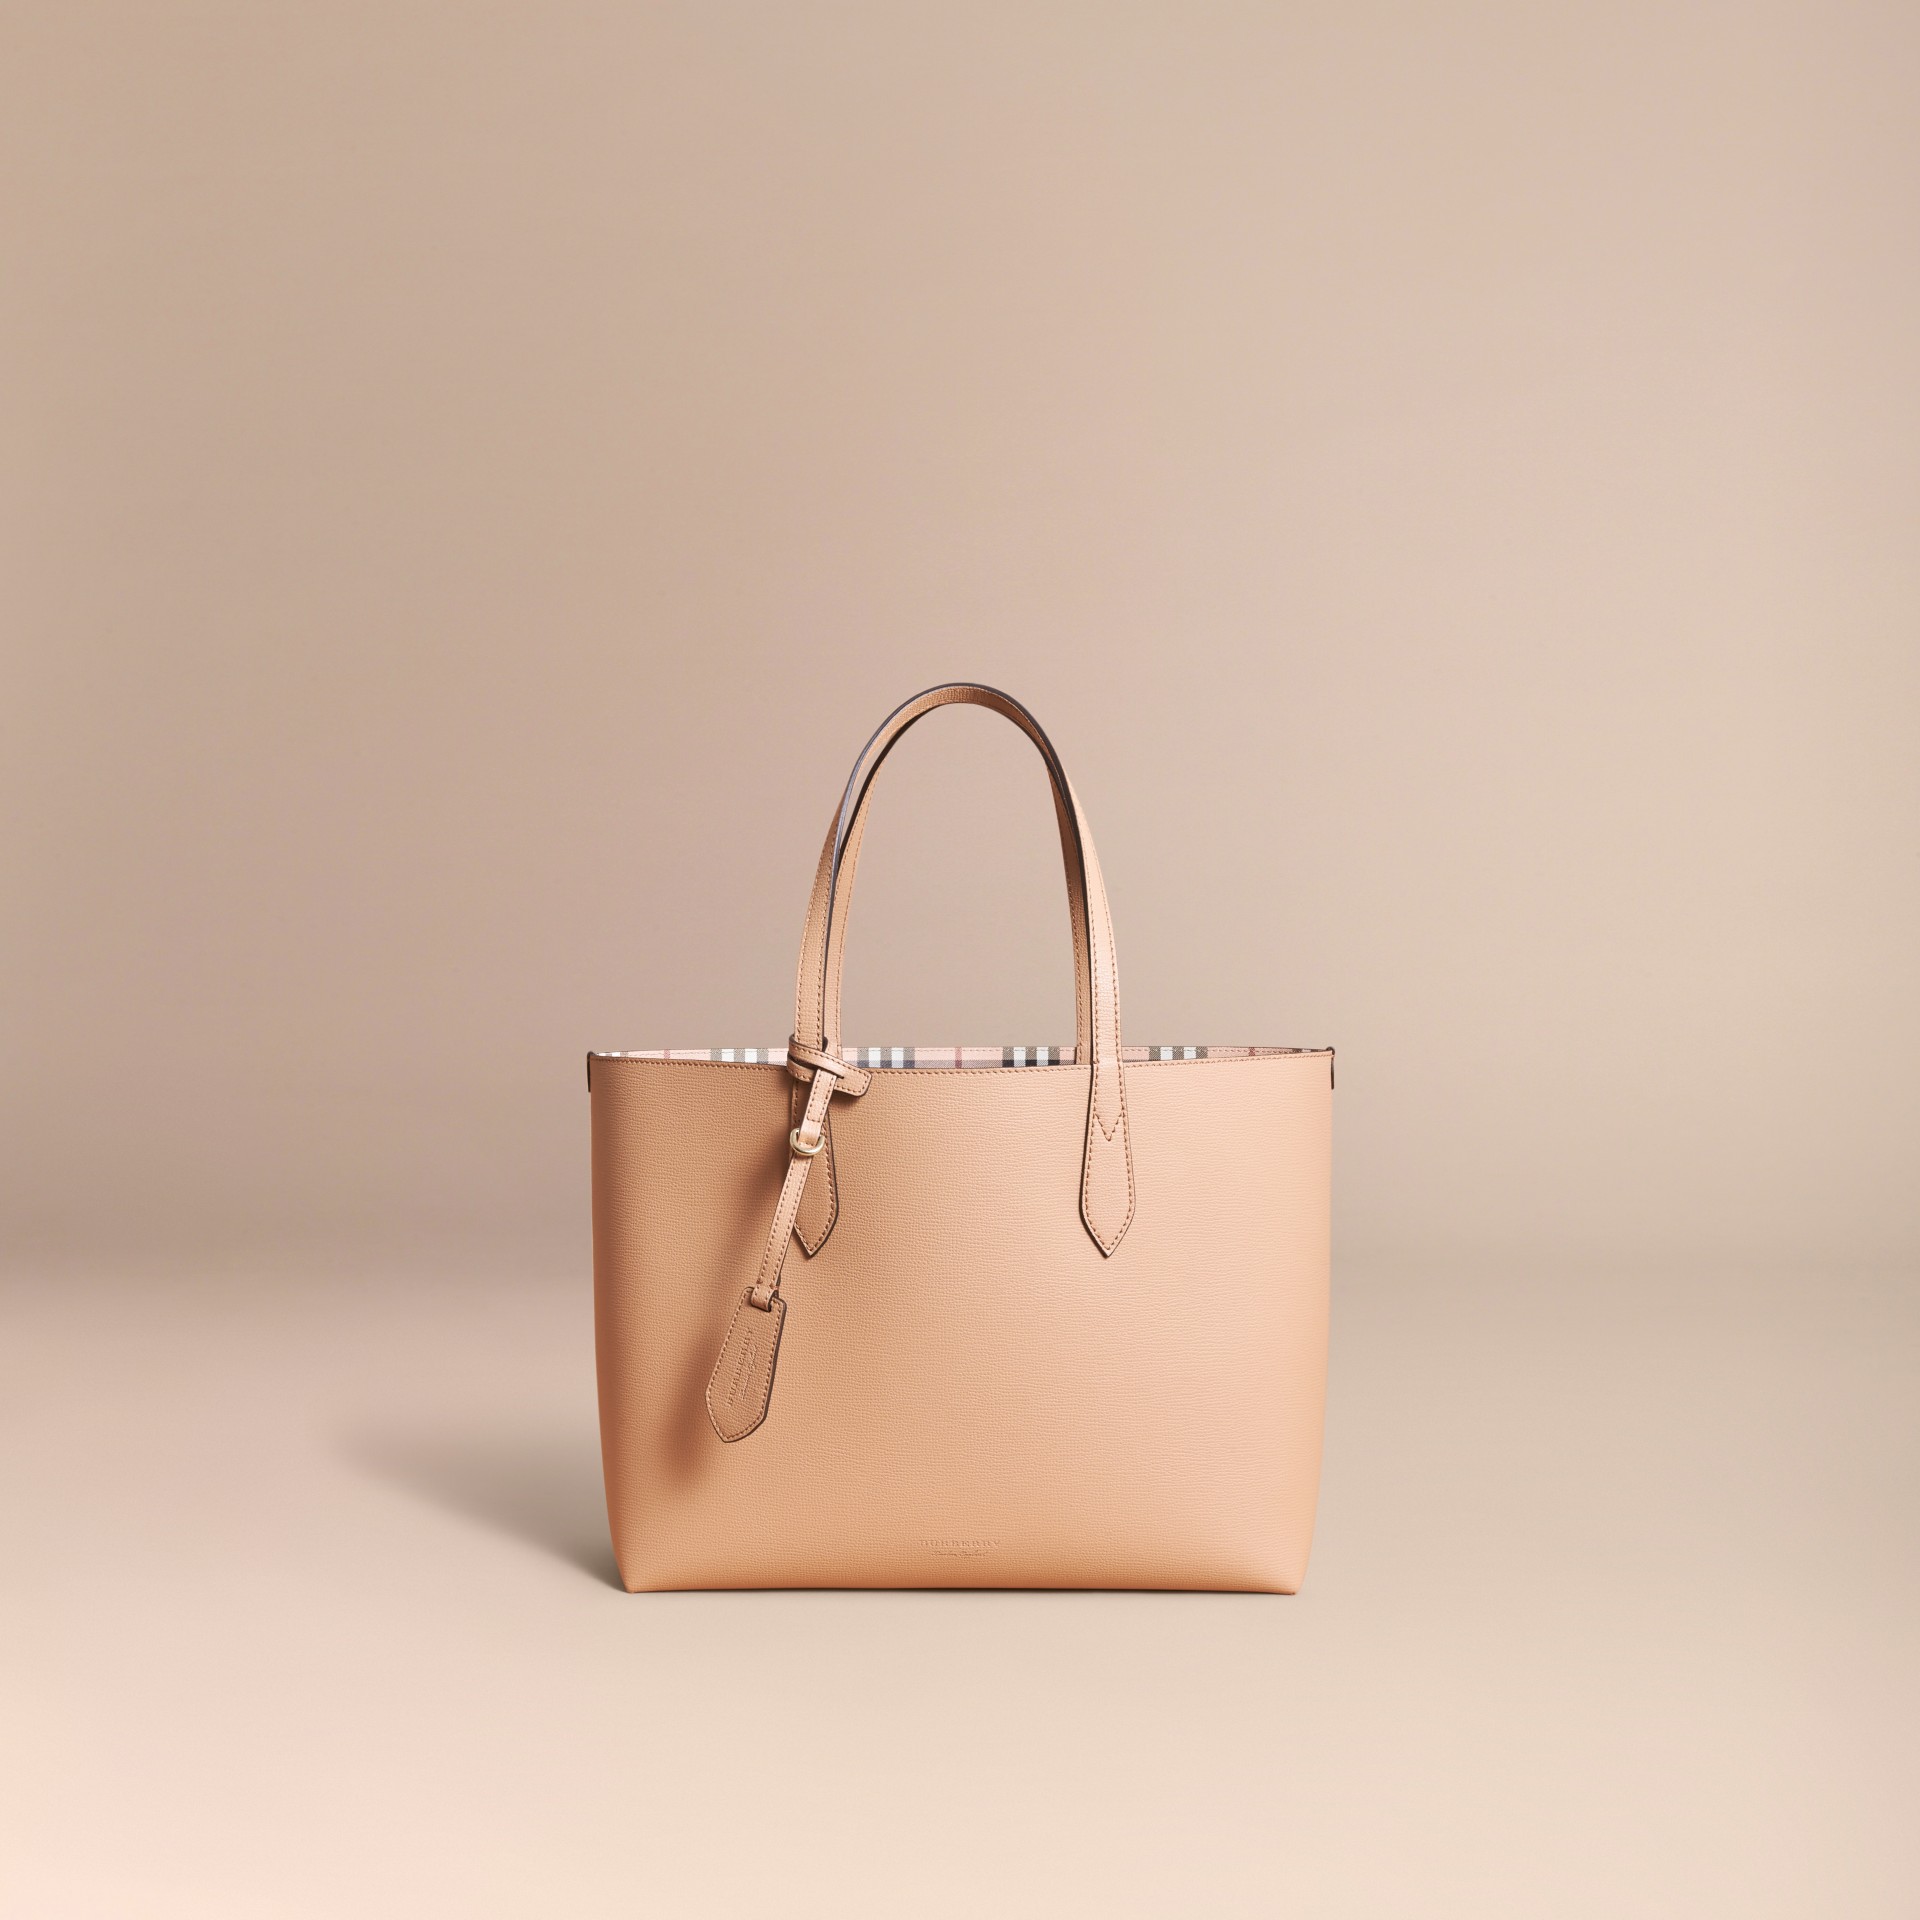 The Medium Reversible Tote in Haymarket Check and Leather in Mid Camel ...